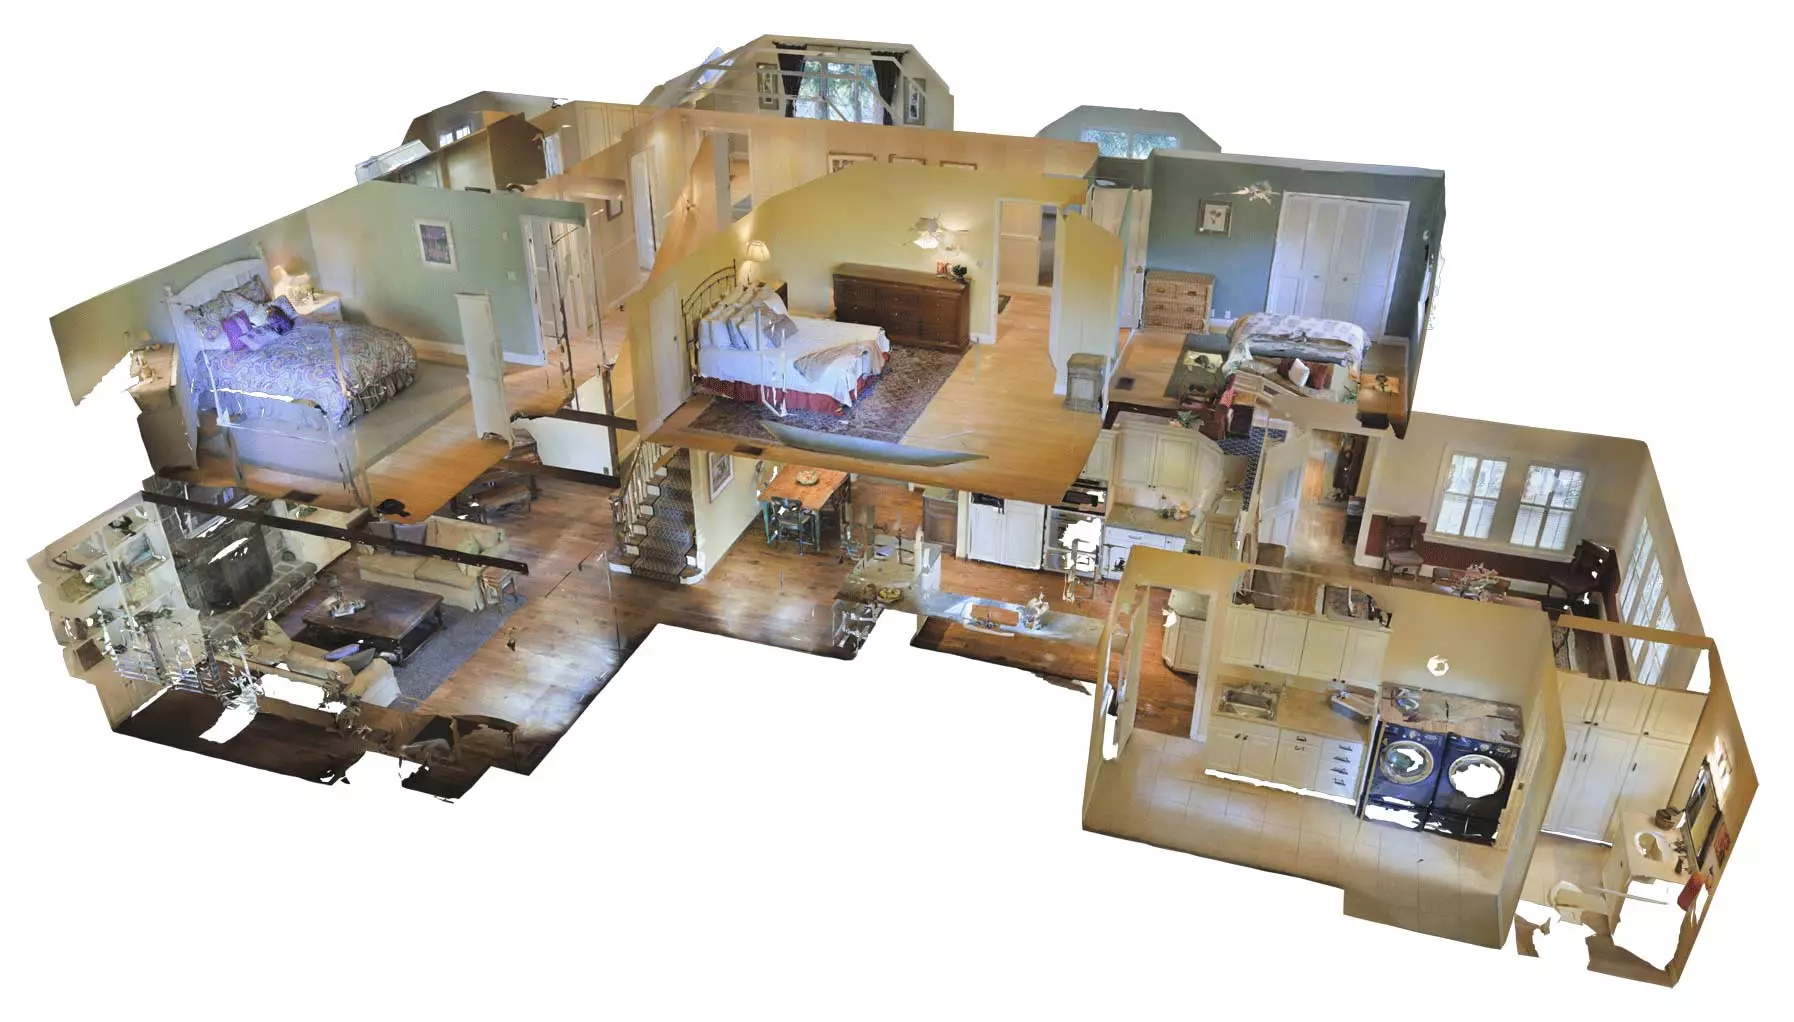 The "dollhouse view" of a Matterport 3d scan